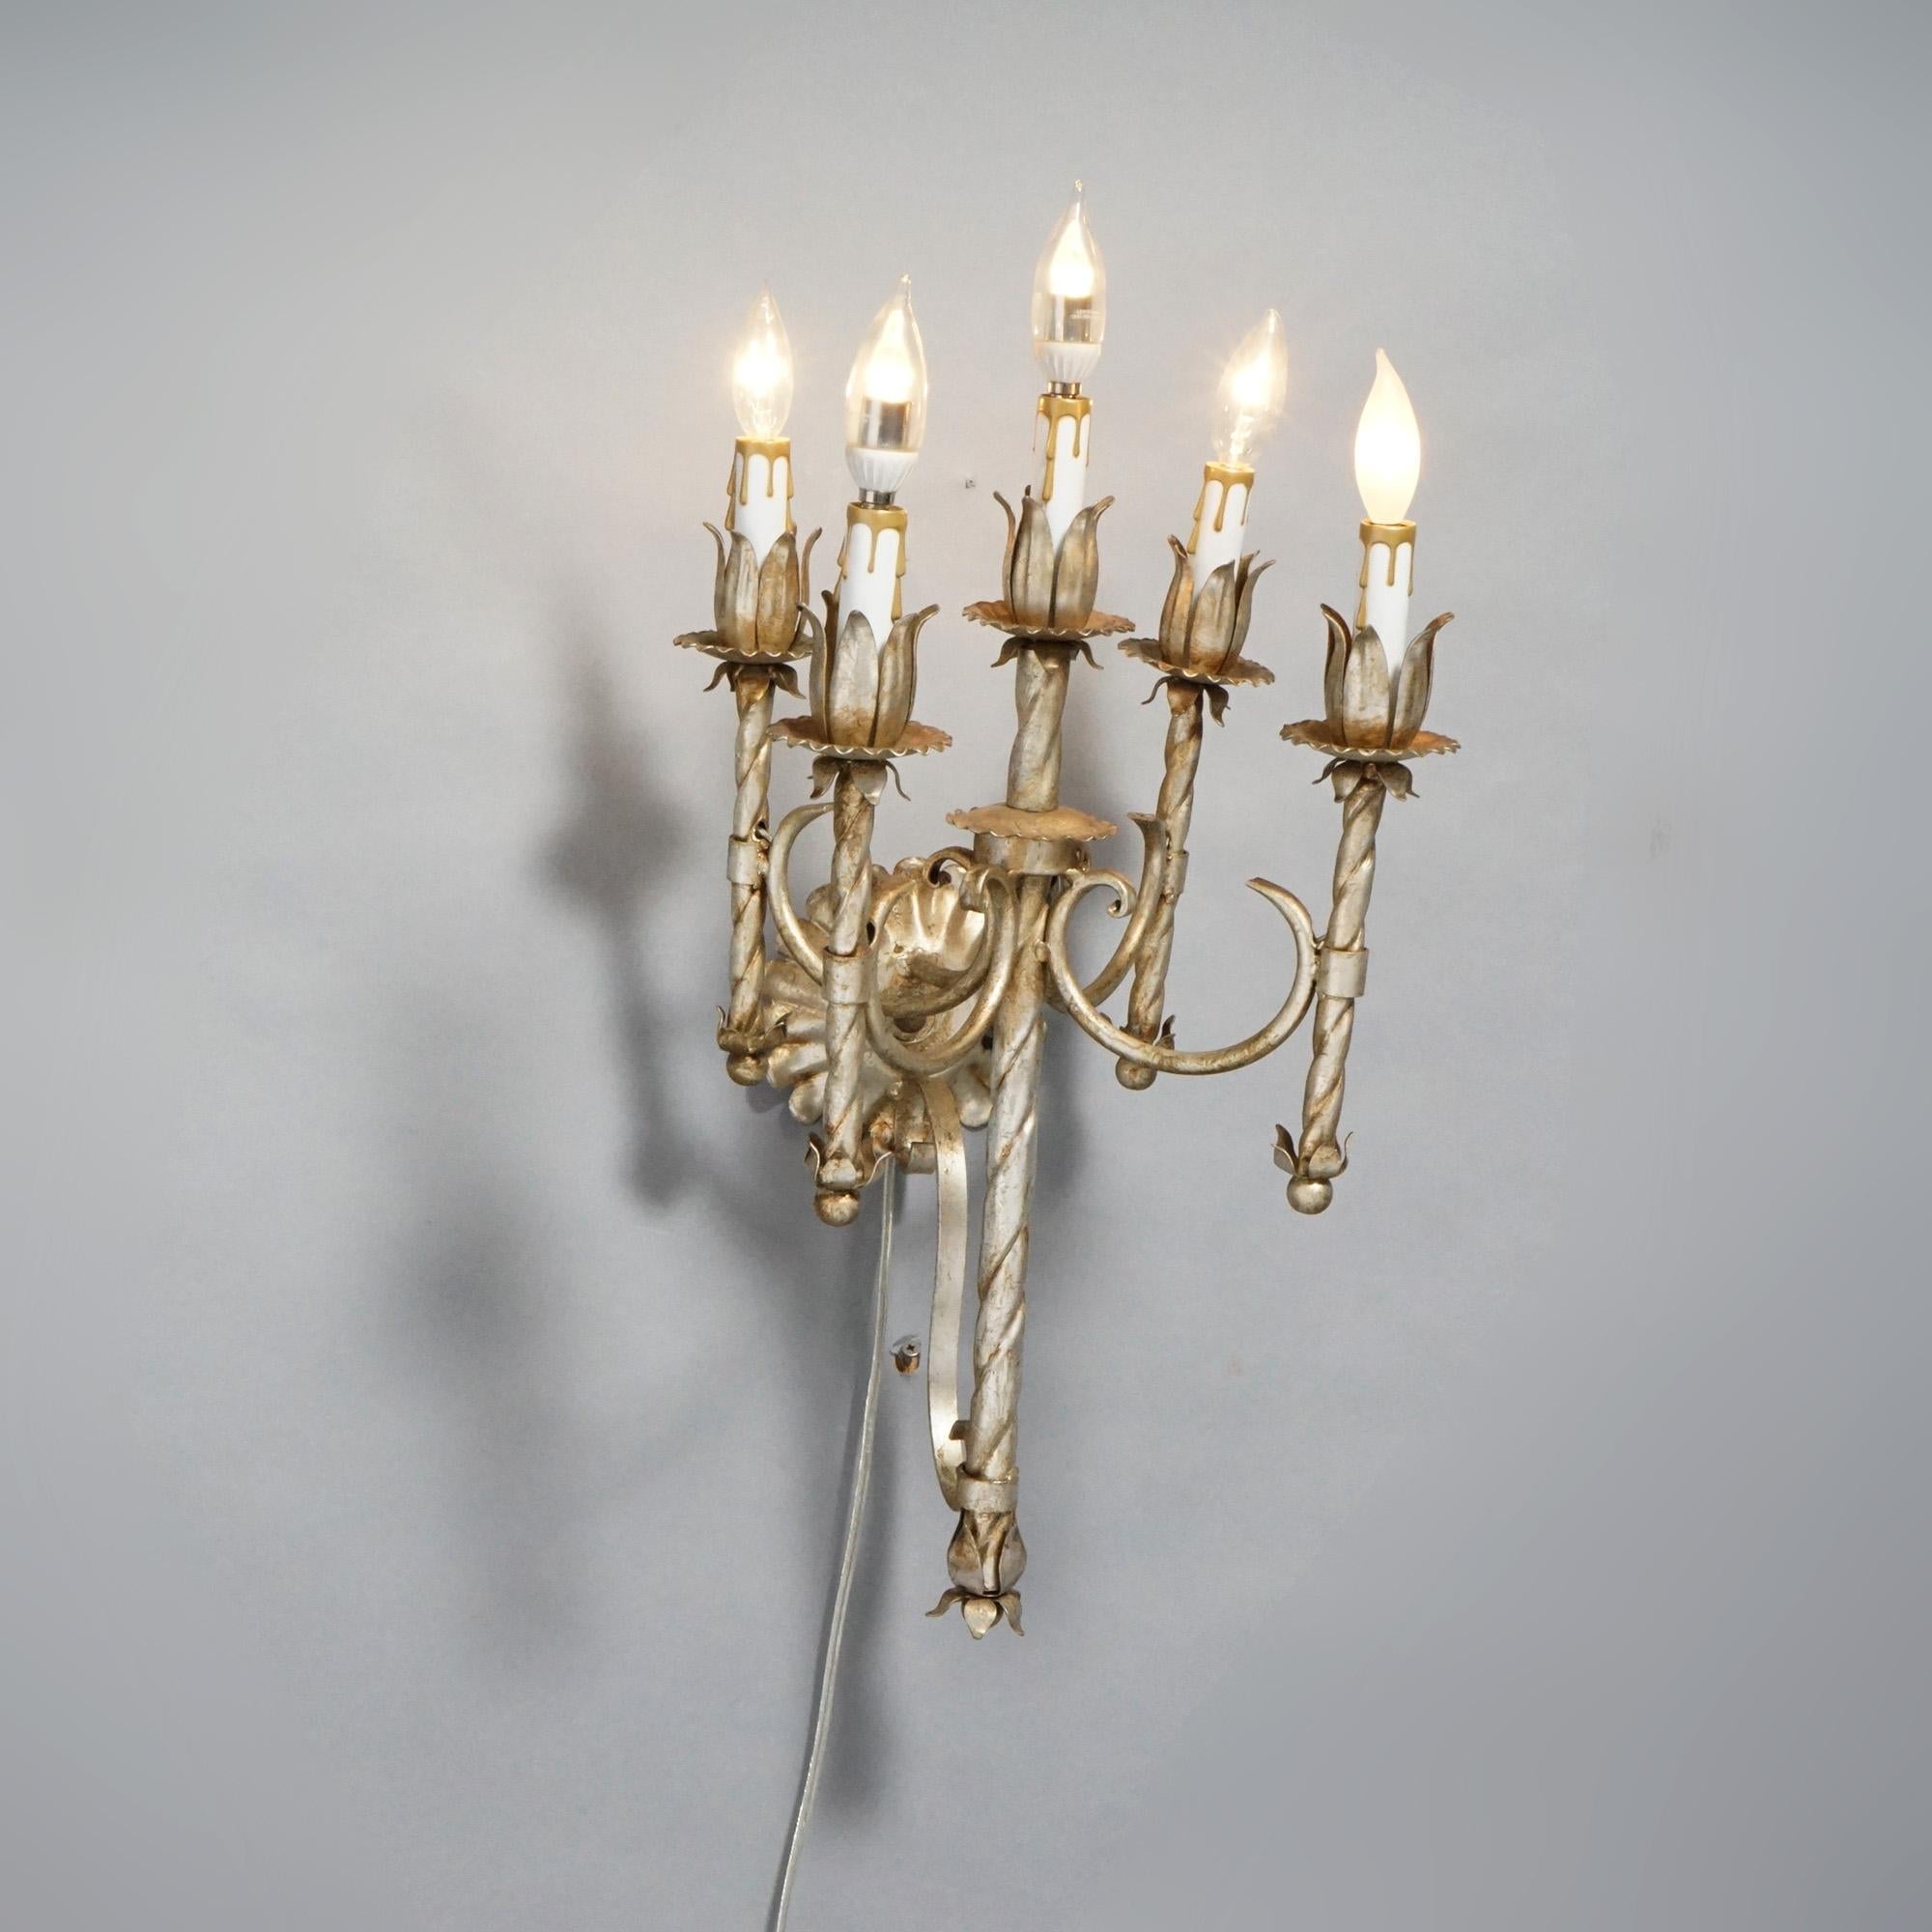 Antique Arts & Crafts Gothic Silvered Finish Candelabra Wall Sconces 20th C. For Sale 5